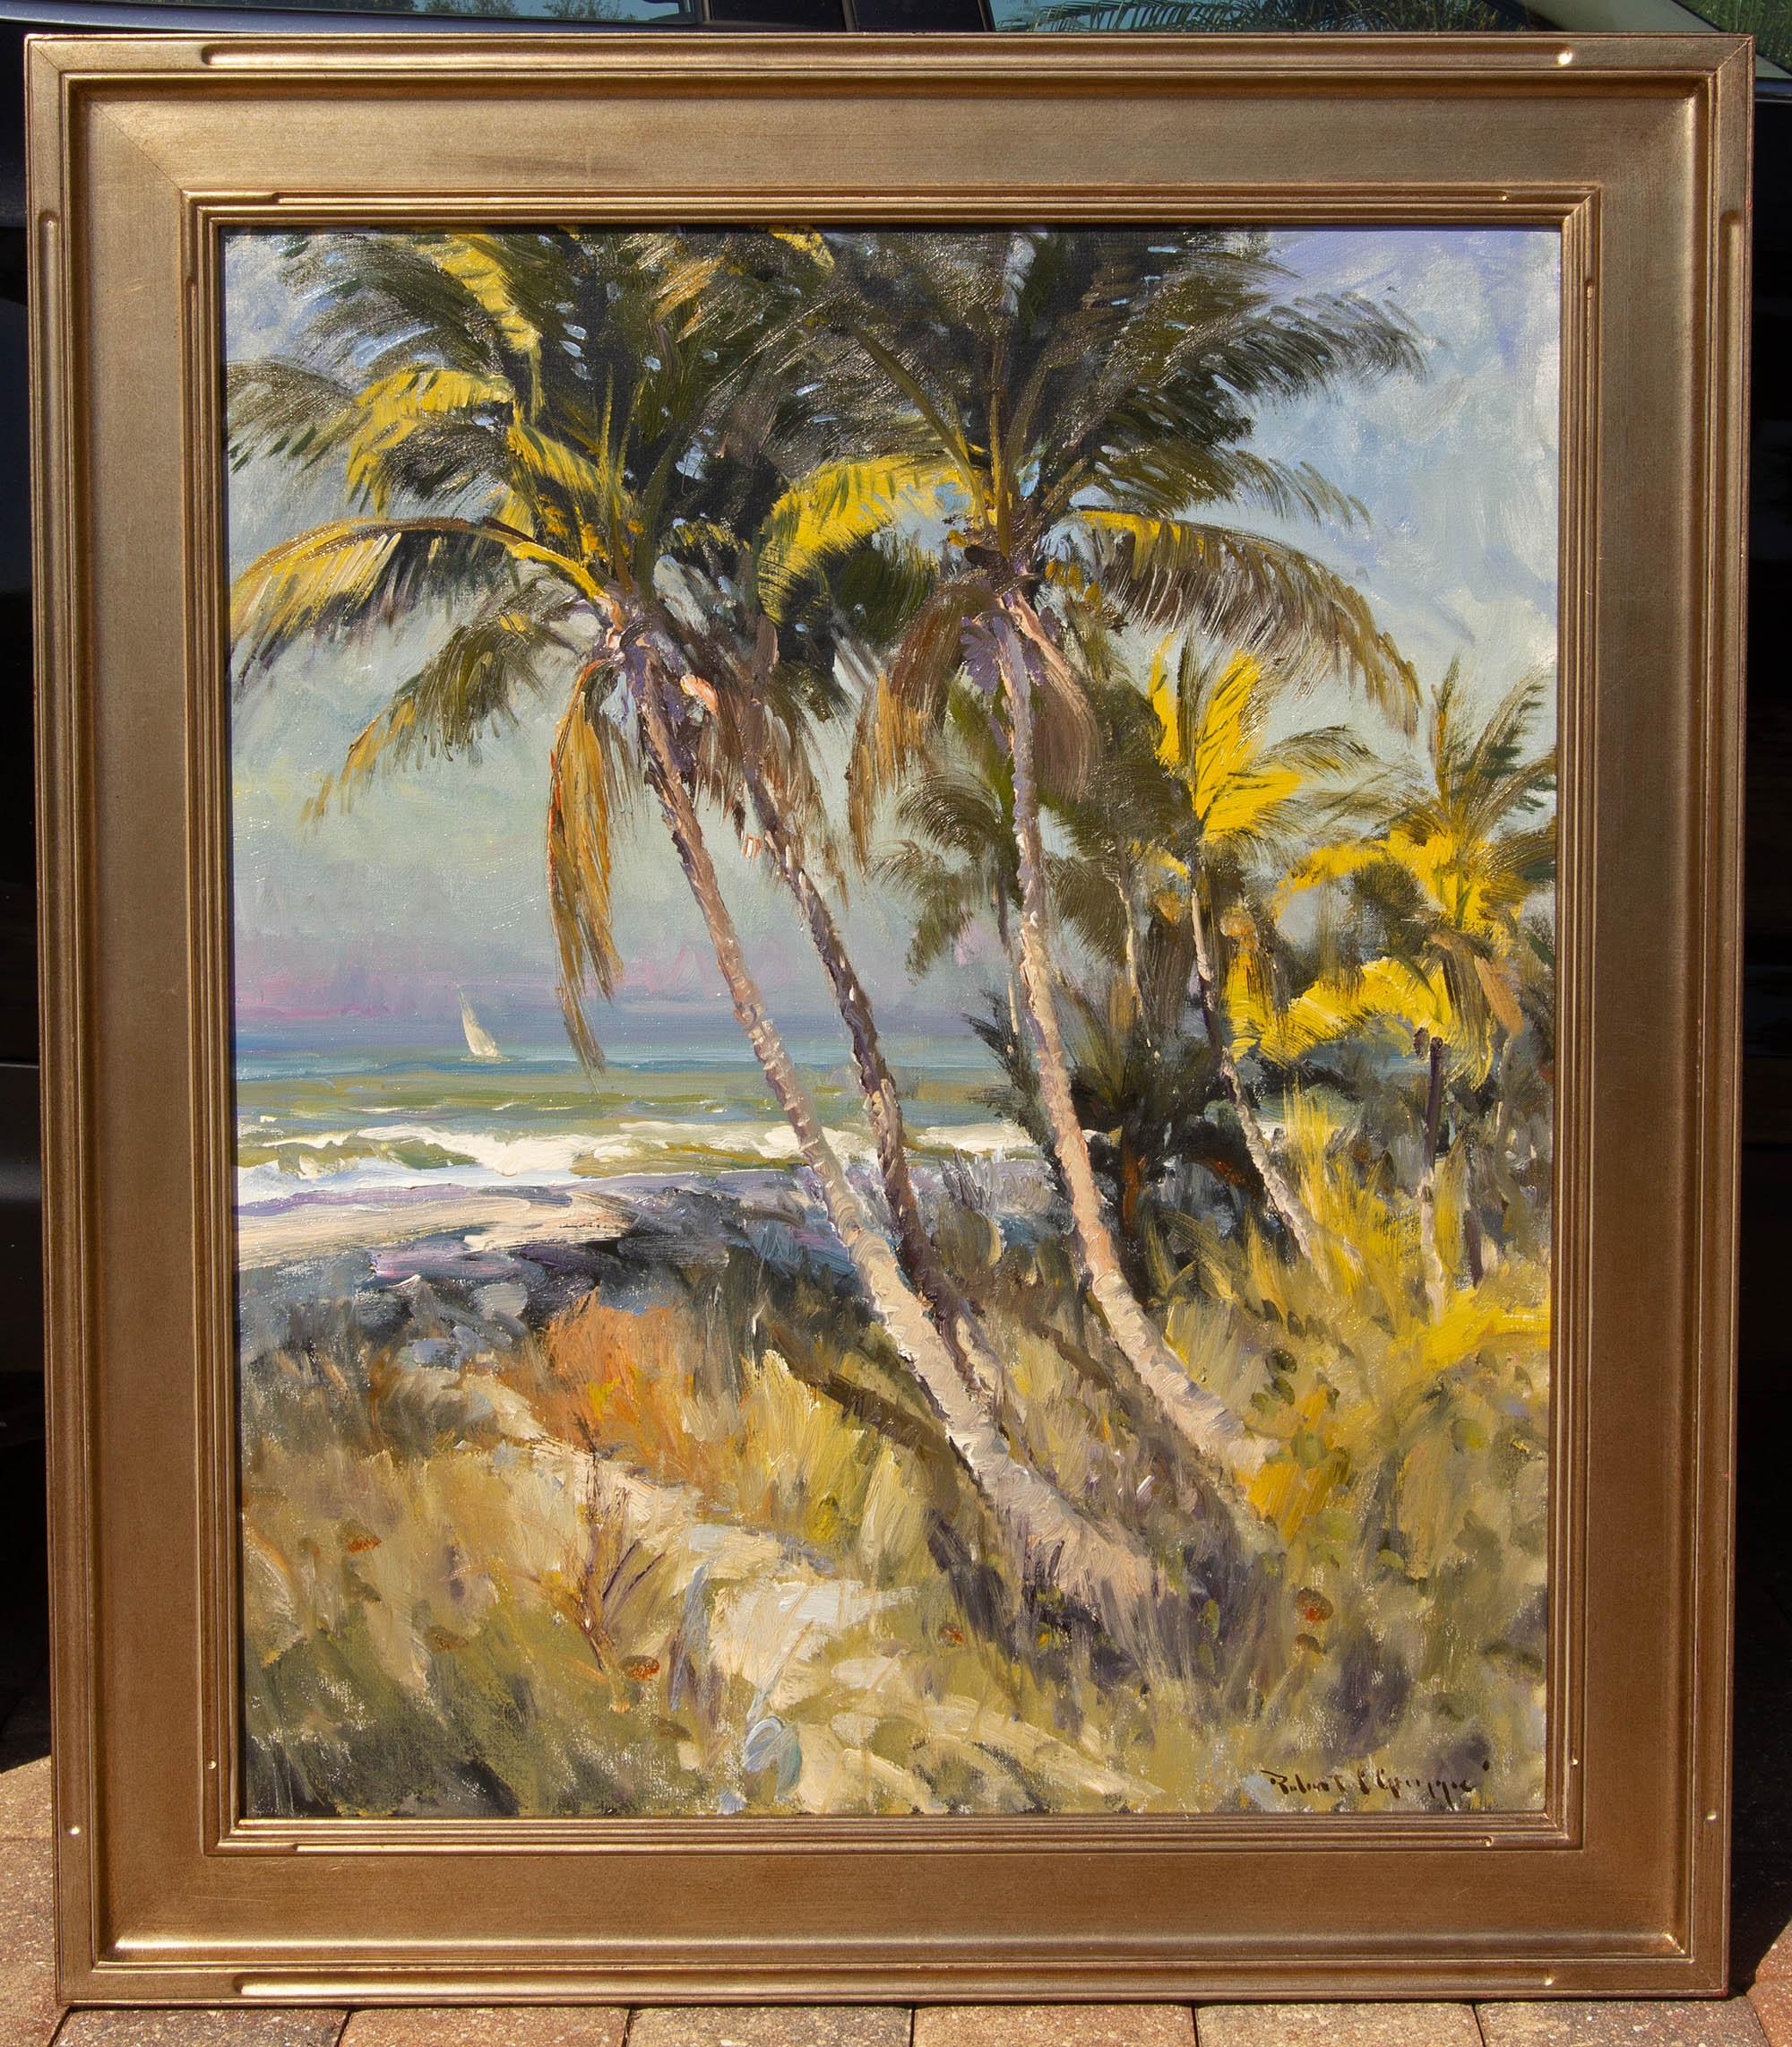 Gulf coast view by Robert C. Gruppe. Oil on canvas.

Robert Charles Gruppe, a contemporary impressionist painter, was born in 1944, the son of the legendary Emile A. Gruppe, and the grandson of Charles Paul Gruppe. Robert C. Gruppe's plein-air